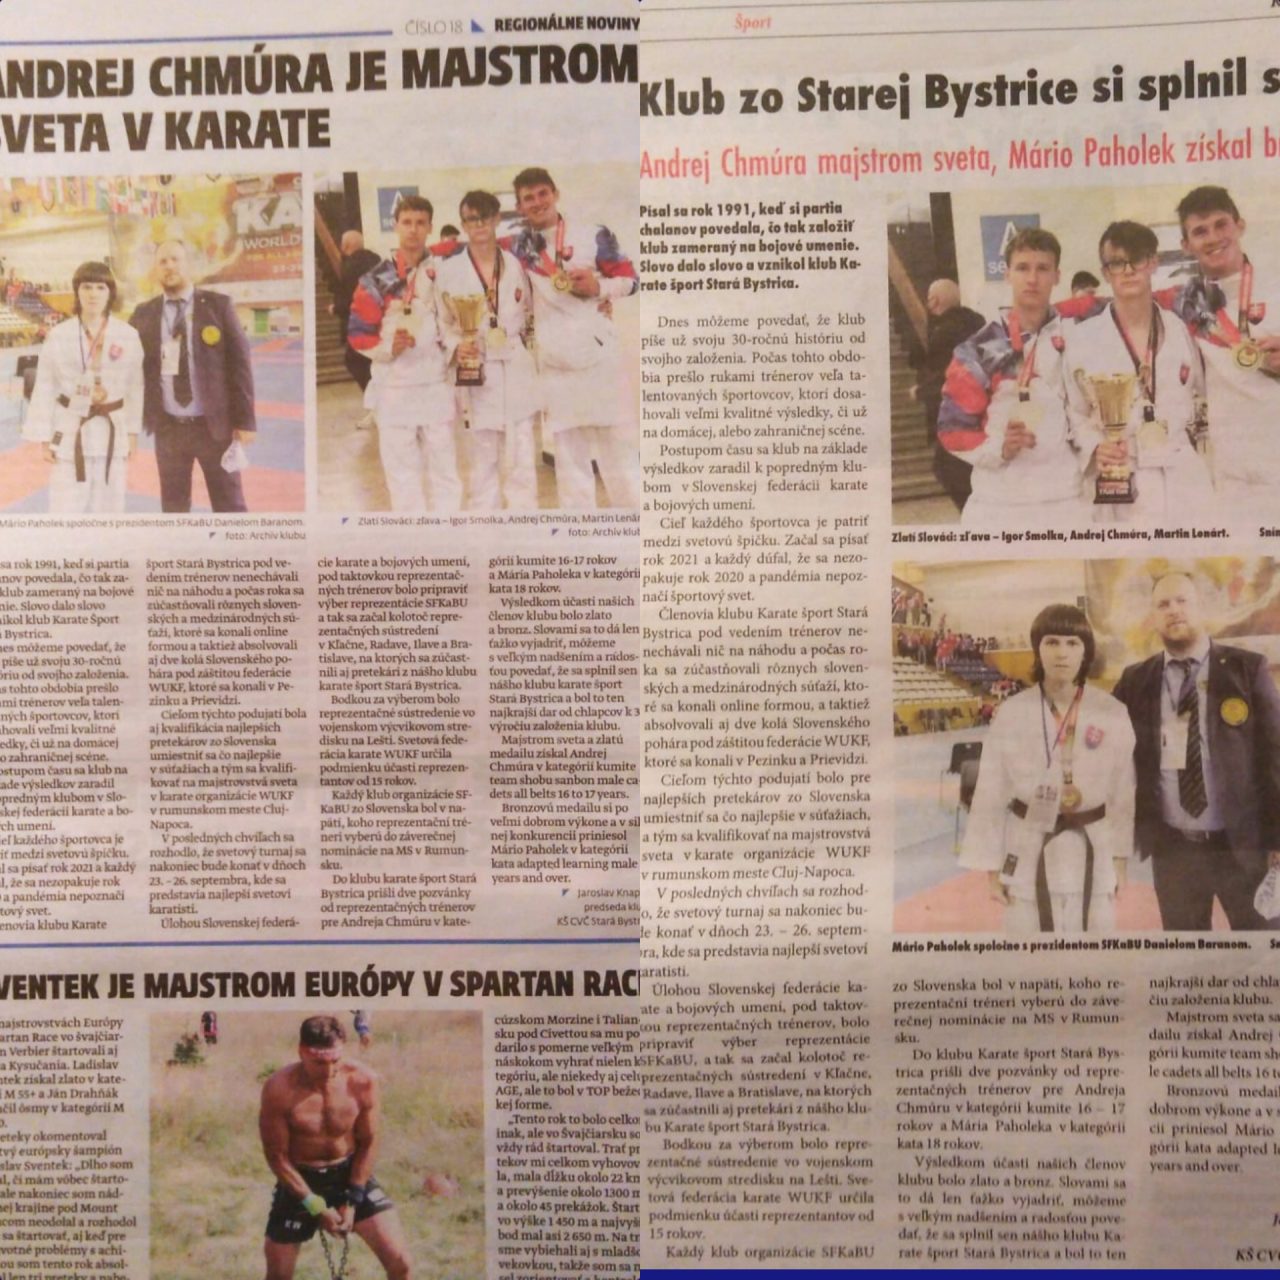 https://karate-slovakia.sk/wp-content/uploads/inCollage_20211007_173532953-1280x1280.jpg